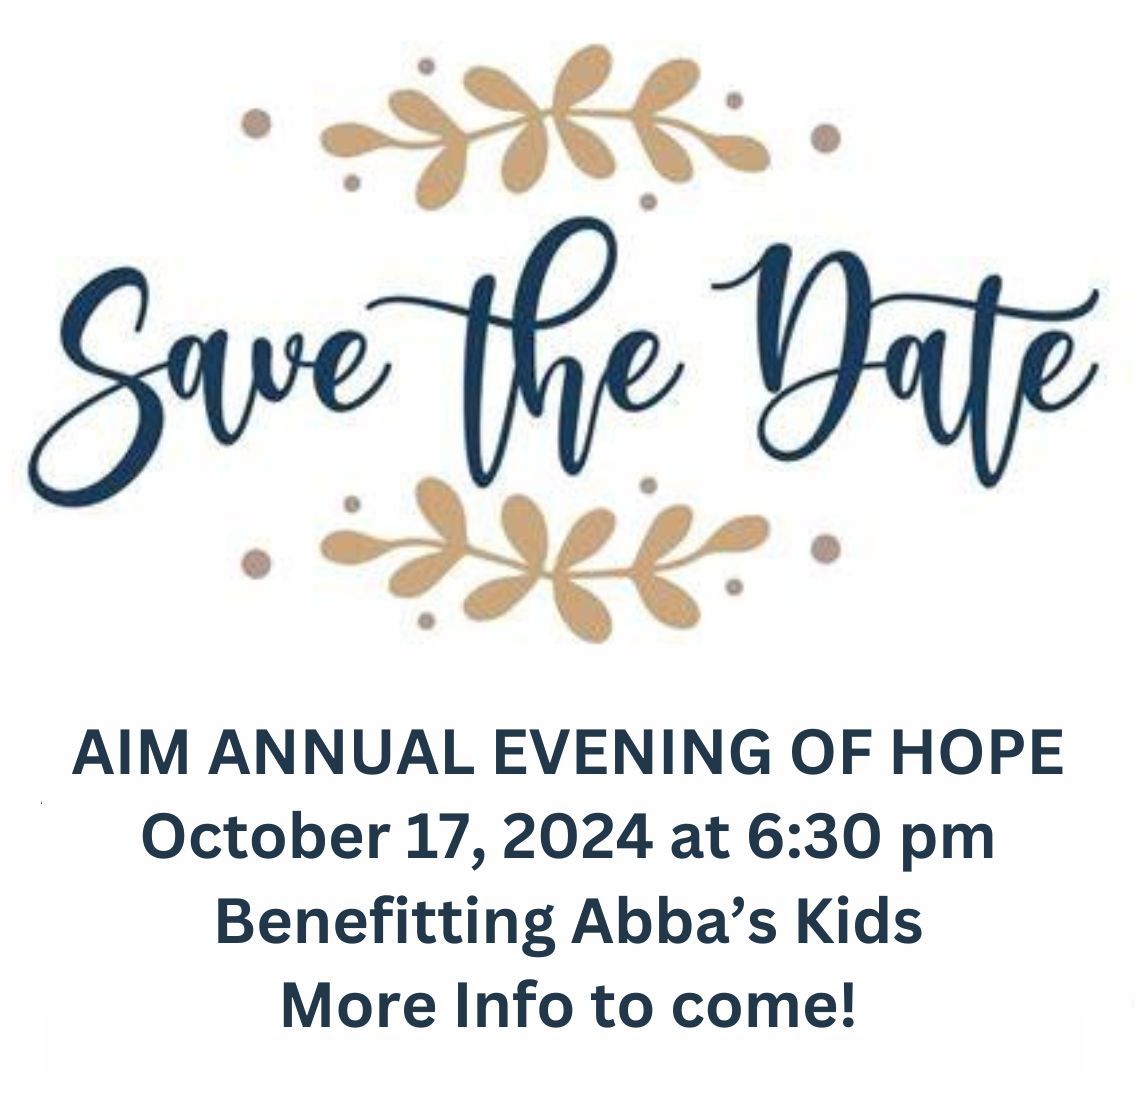 A save the date invitation for an annual evening of hope.